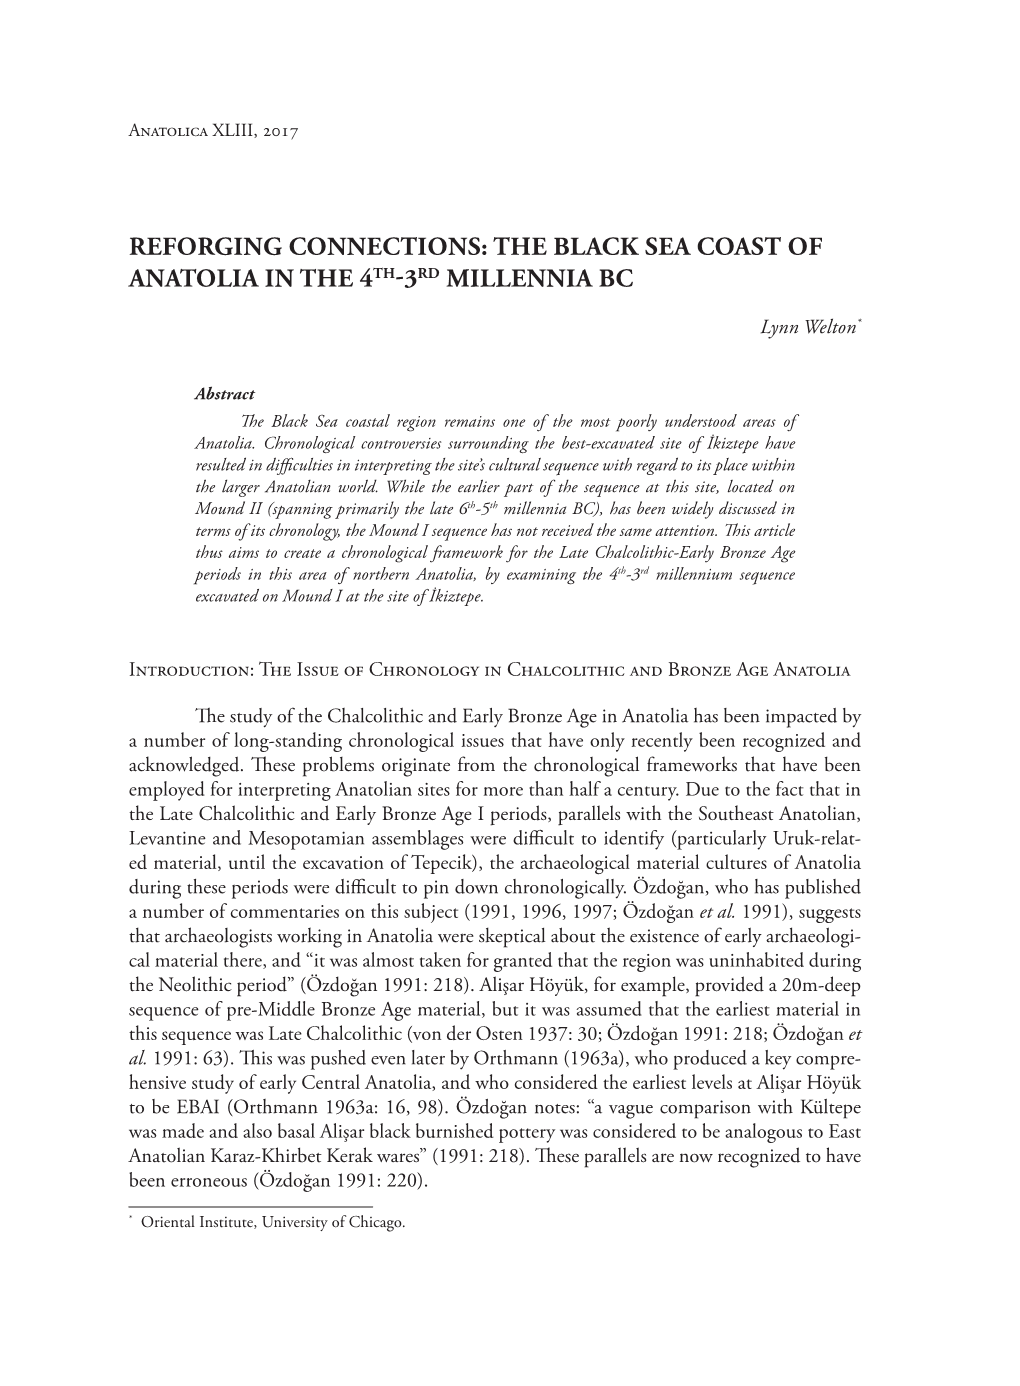 Reforging Connections: the Black Sea Coast of Anatolia in the 4Th3rd Millennia Bc